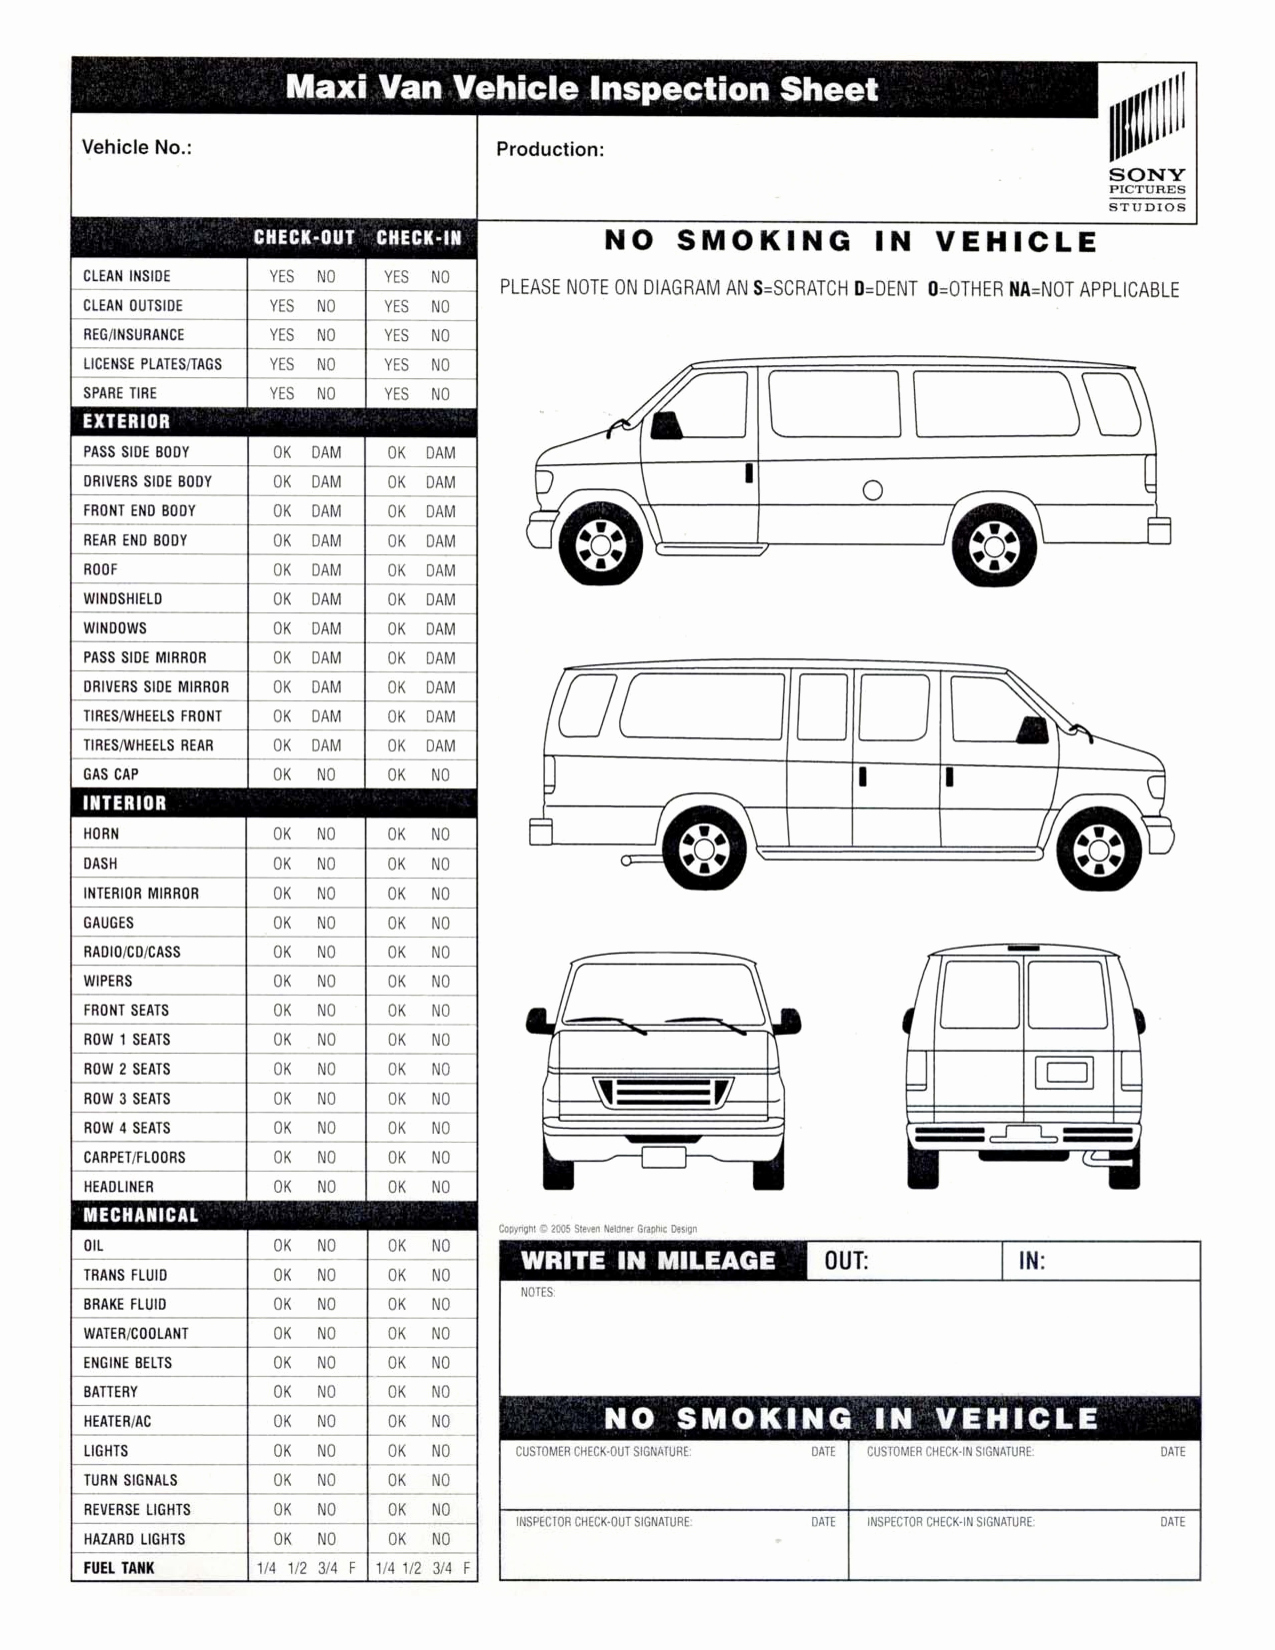 Daily Vehicle Inspection Report Template Awesome Vehicle Inspection Sheet Template